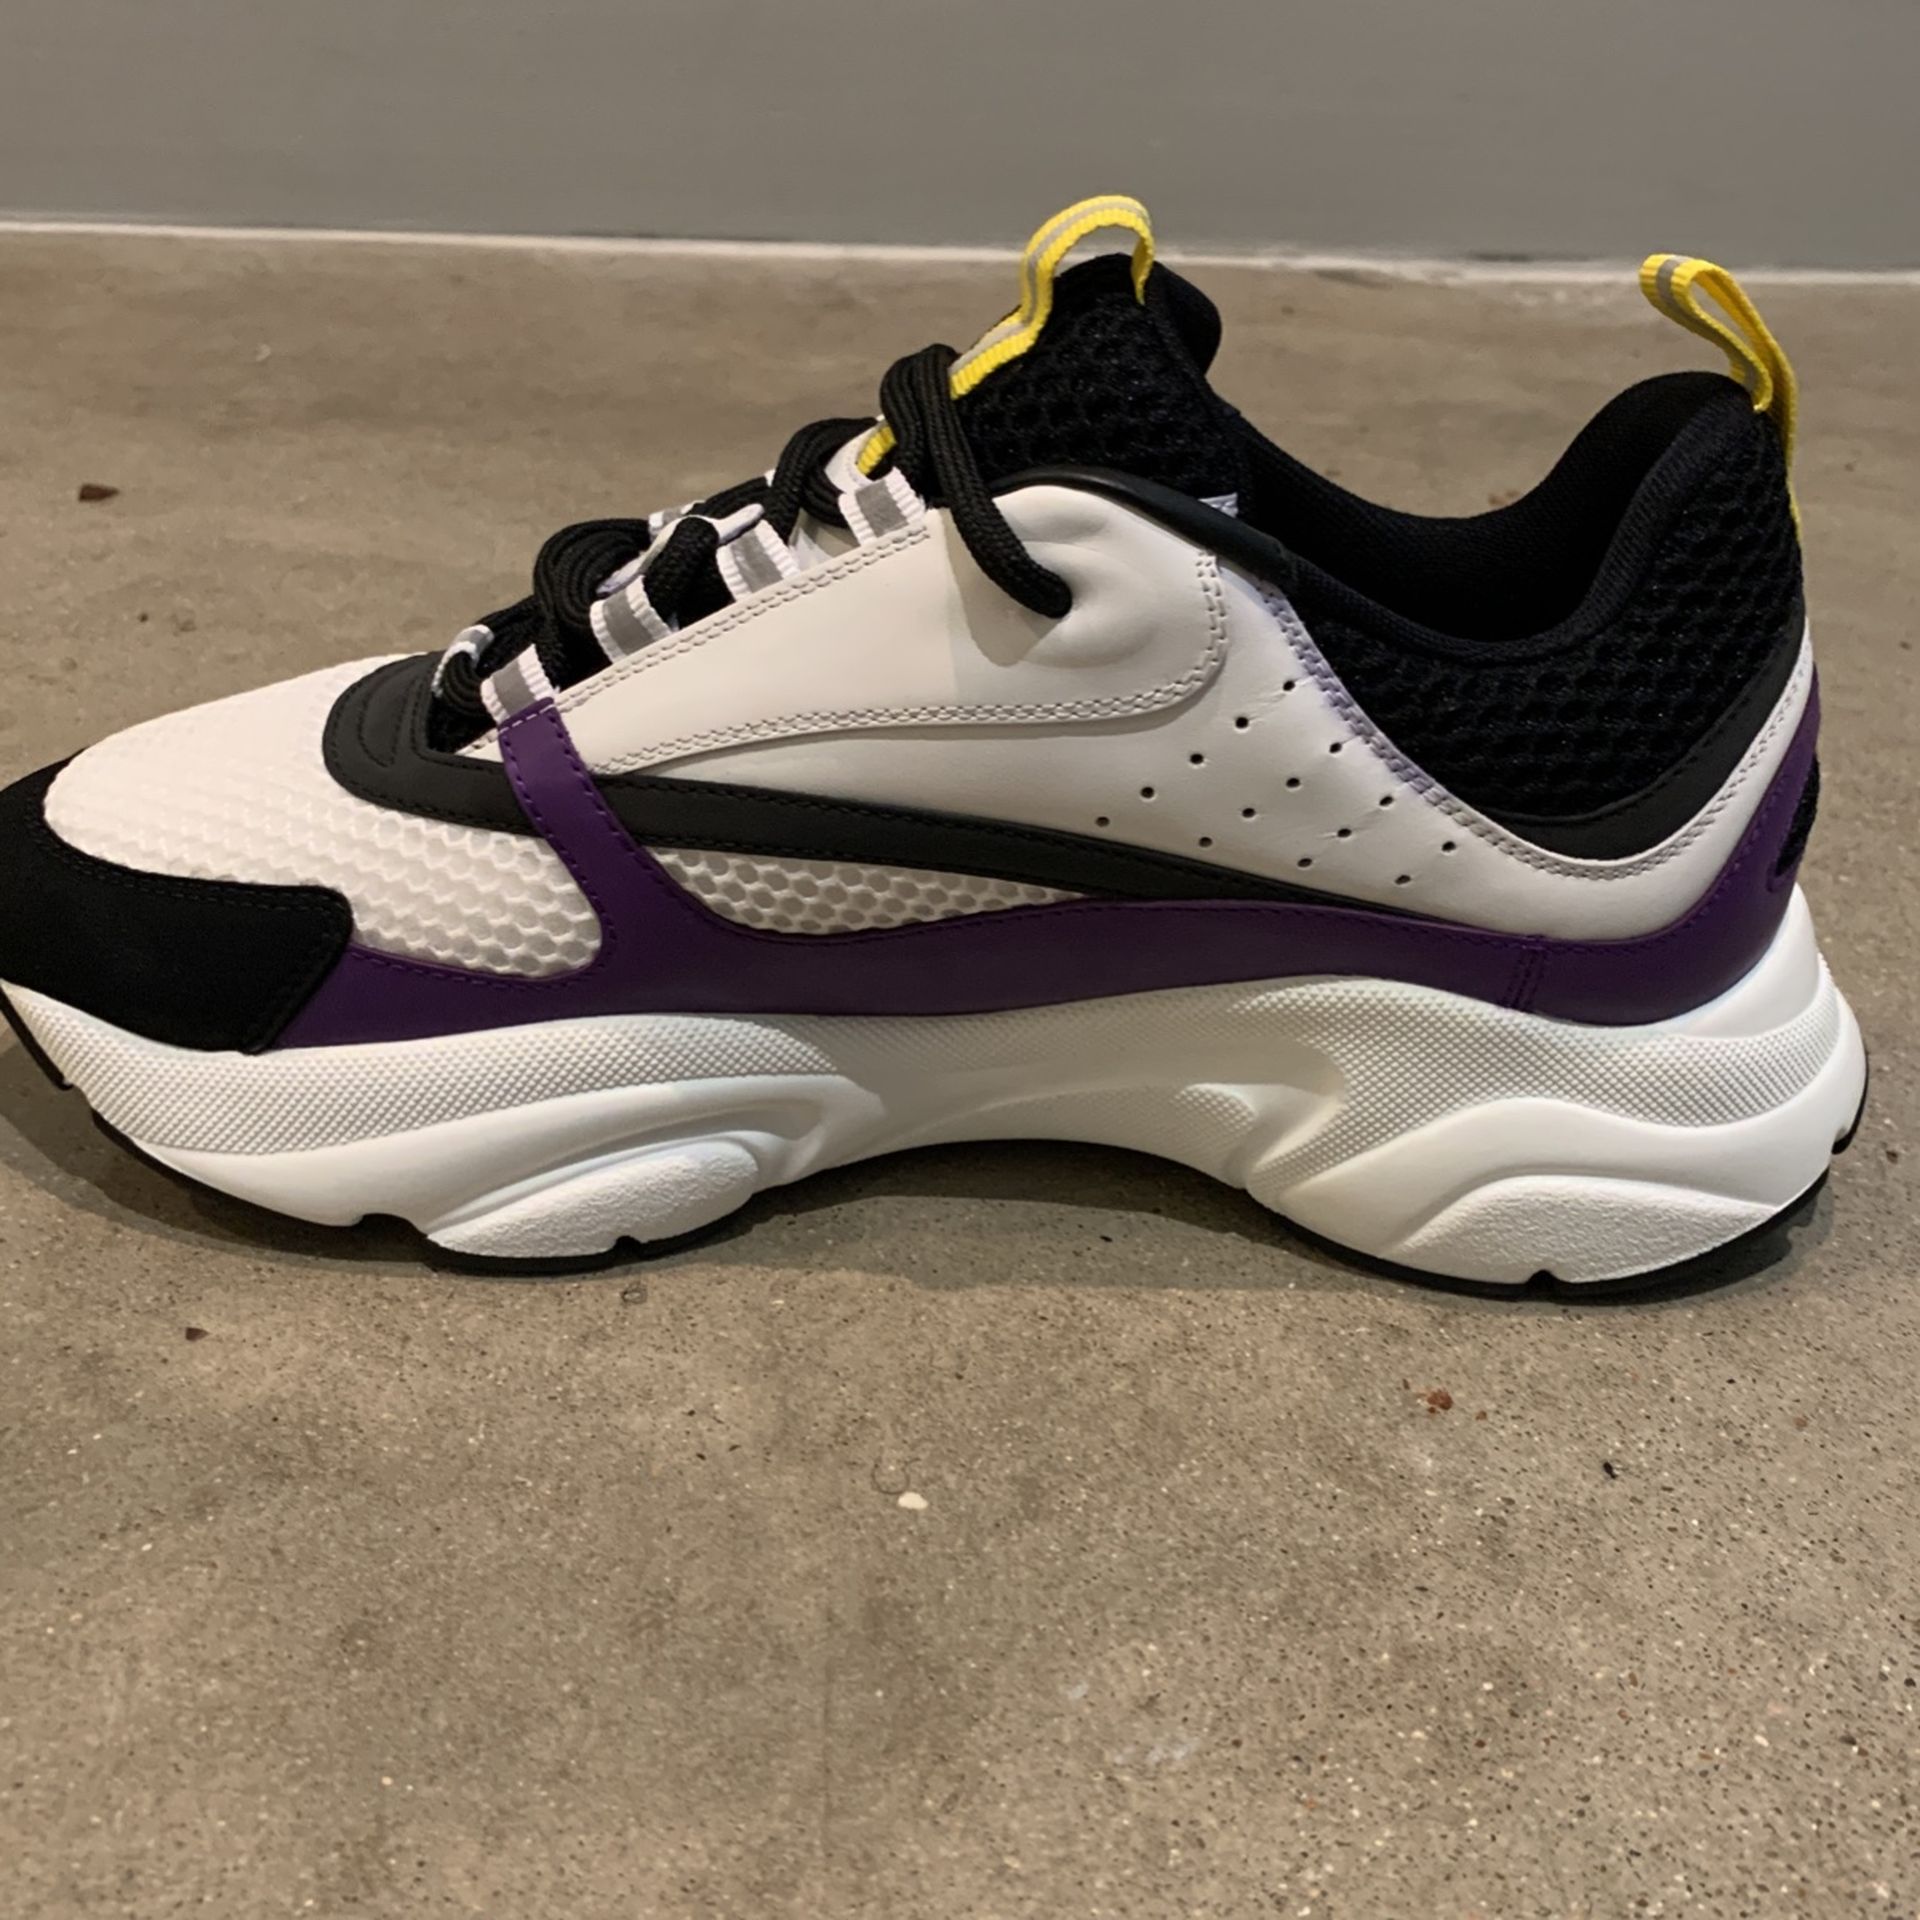 Dior B22 “Violet White” Lakers